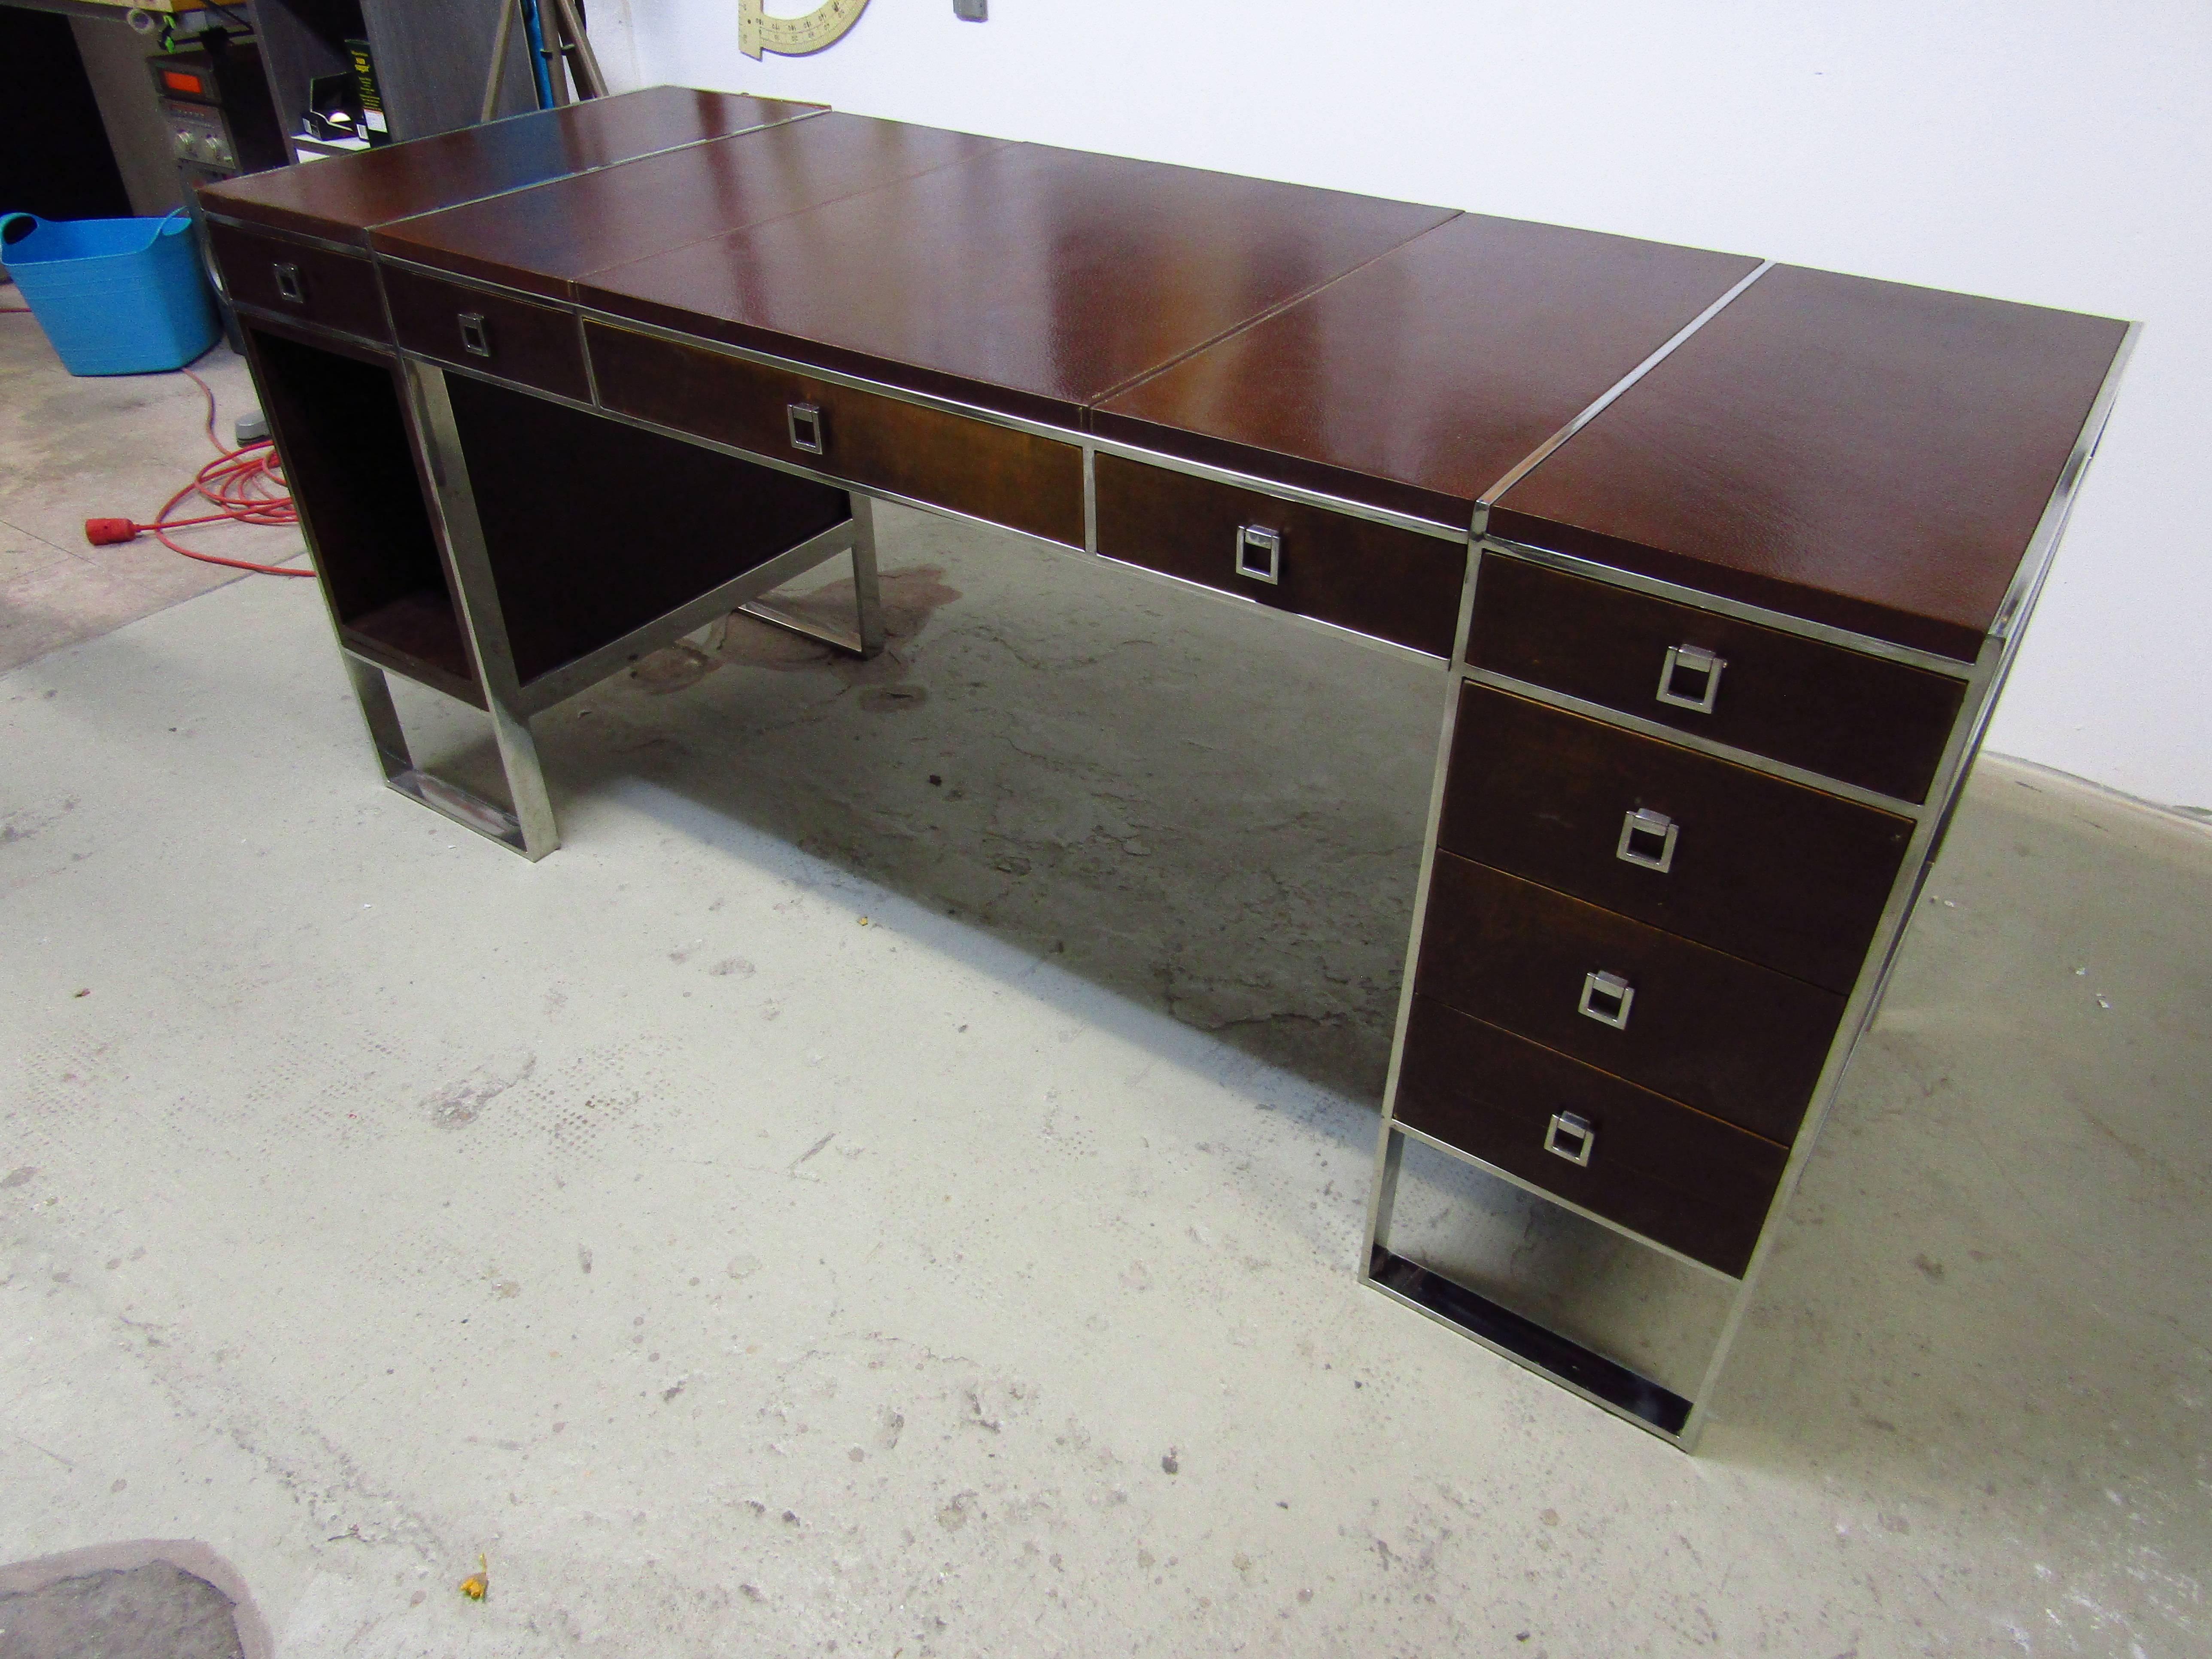 Midcentury Desk by Guy Lefevre for Maison Jansen, France, late 1960s. Good original condition. Chrome in very good condition. Front side with eight drawers. Top coated with embossed genuine leather.

Could also be used as console!

